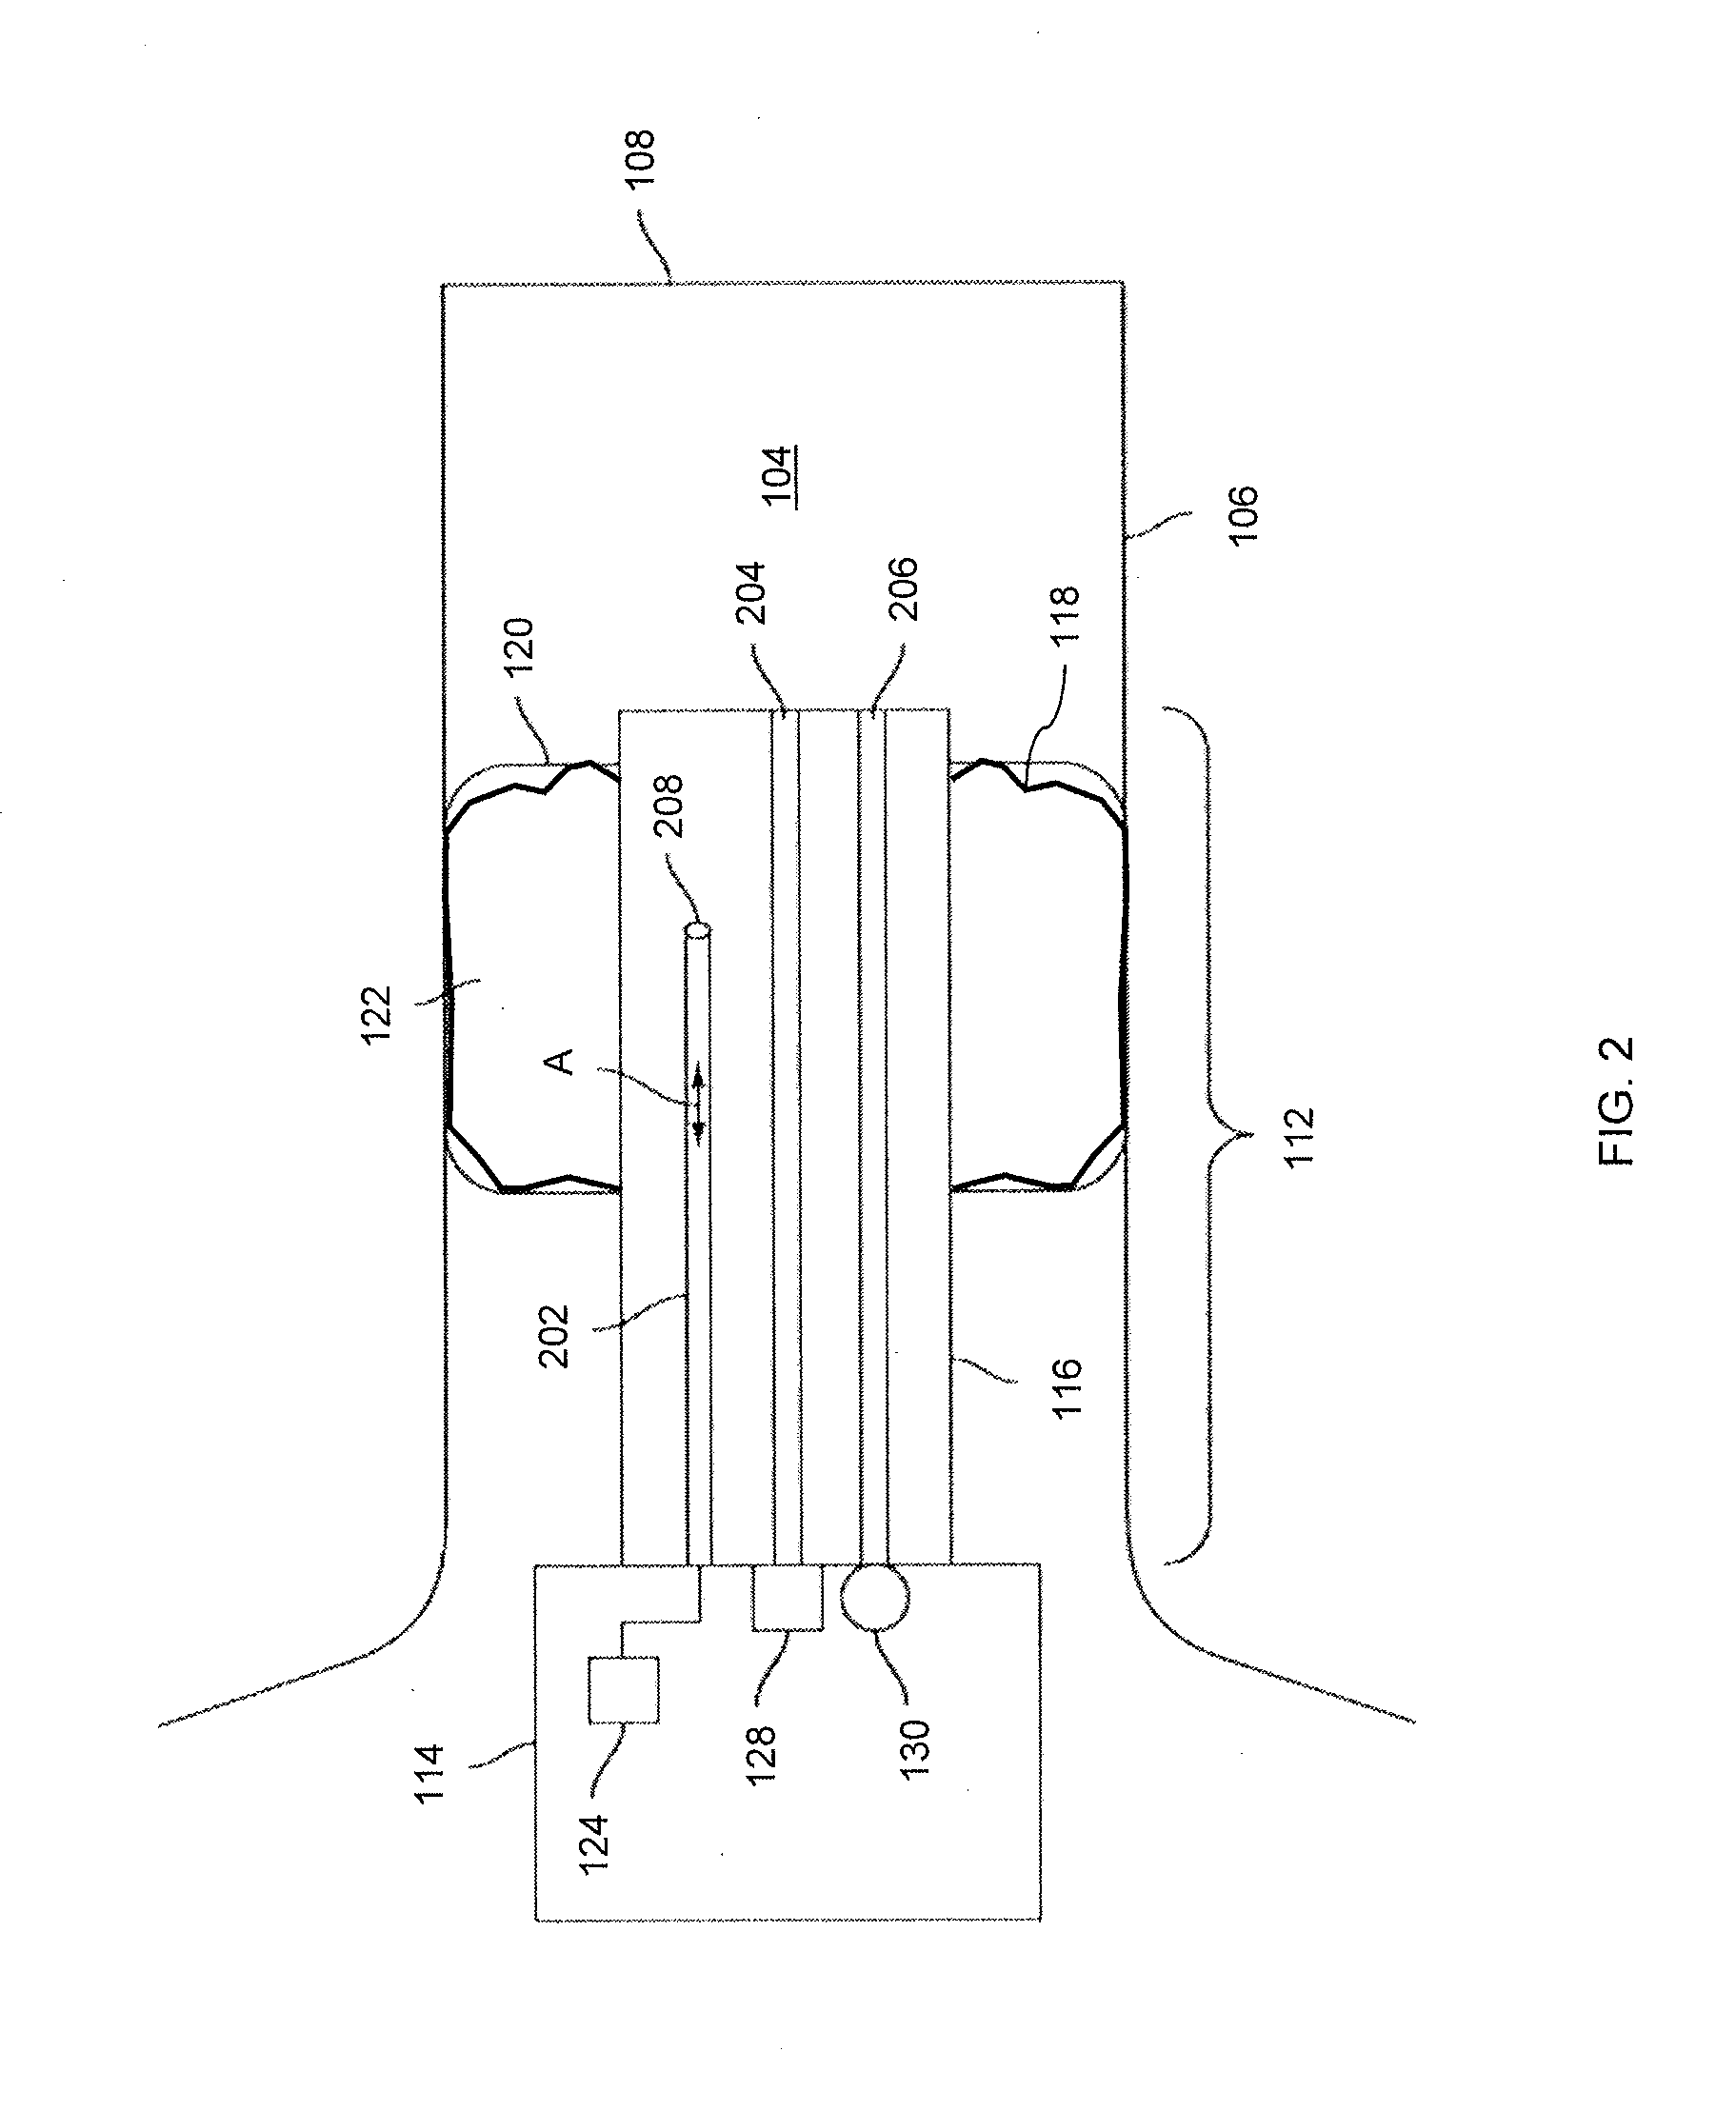 Occlusion device capable of occluding an ear canal